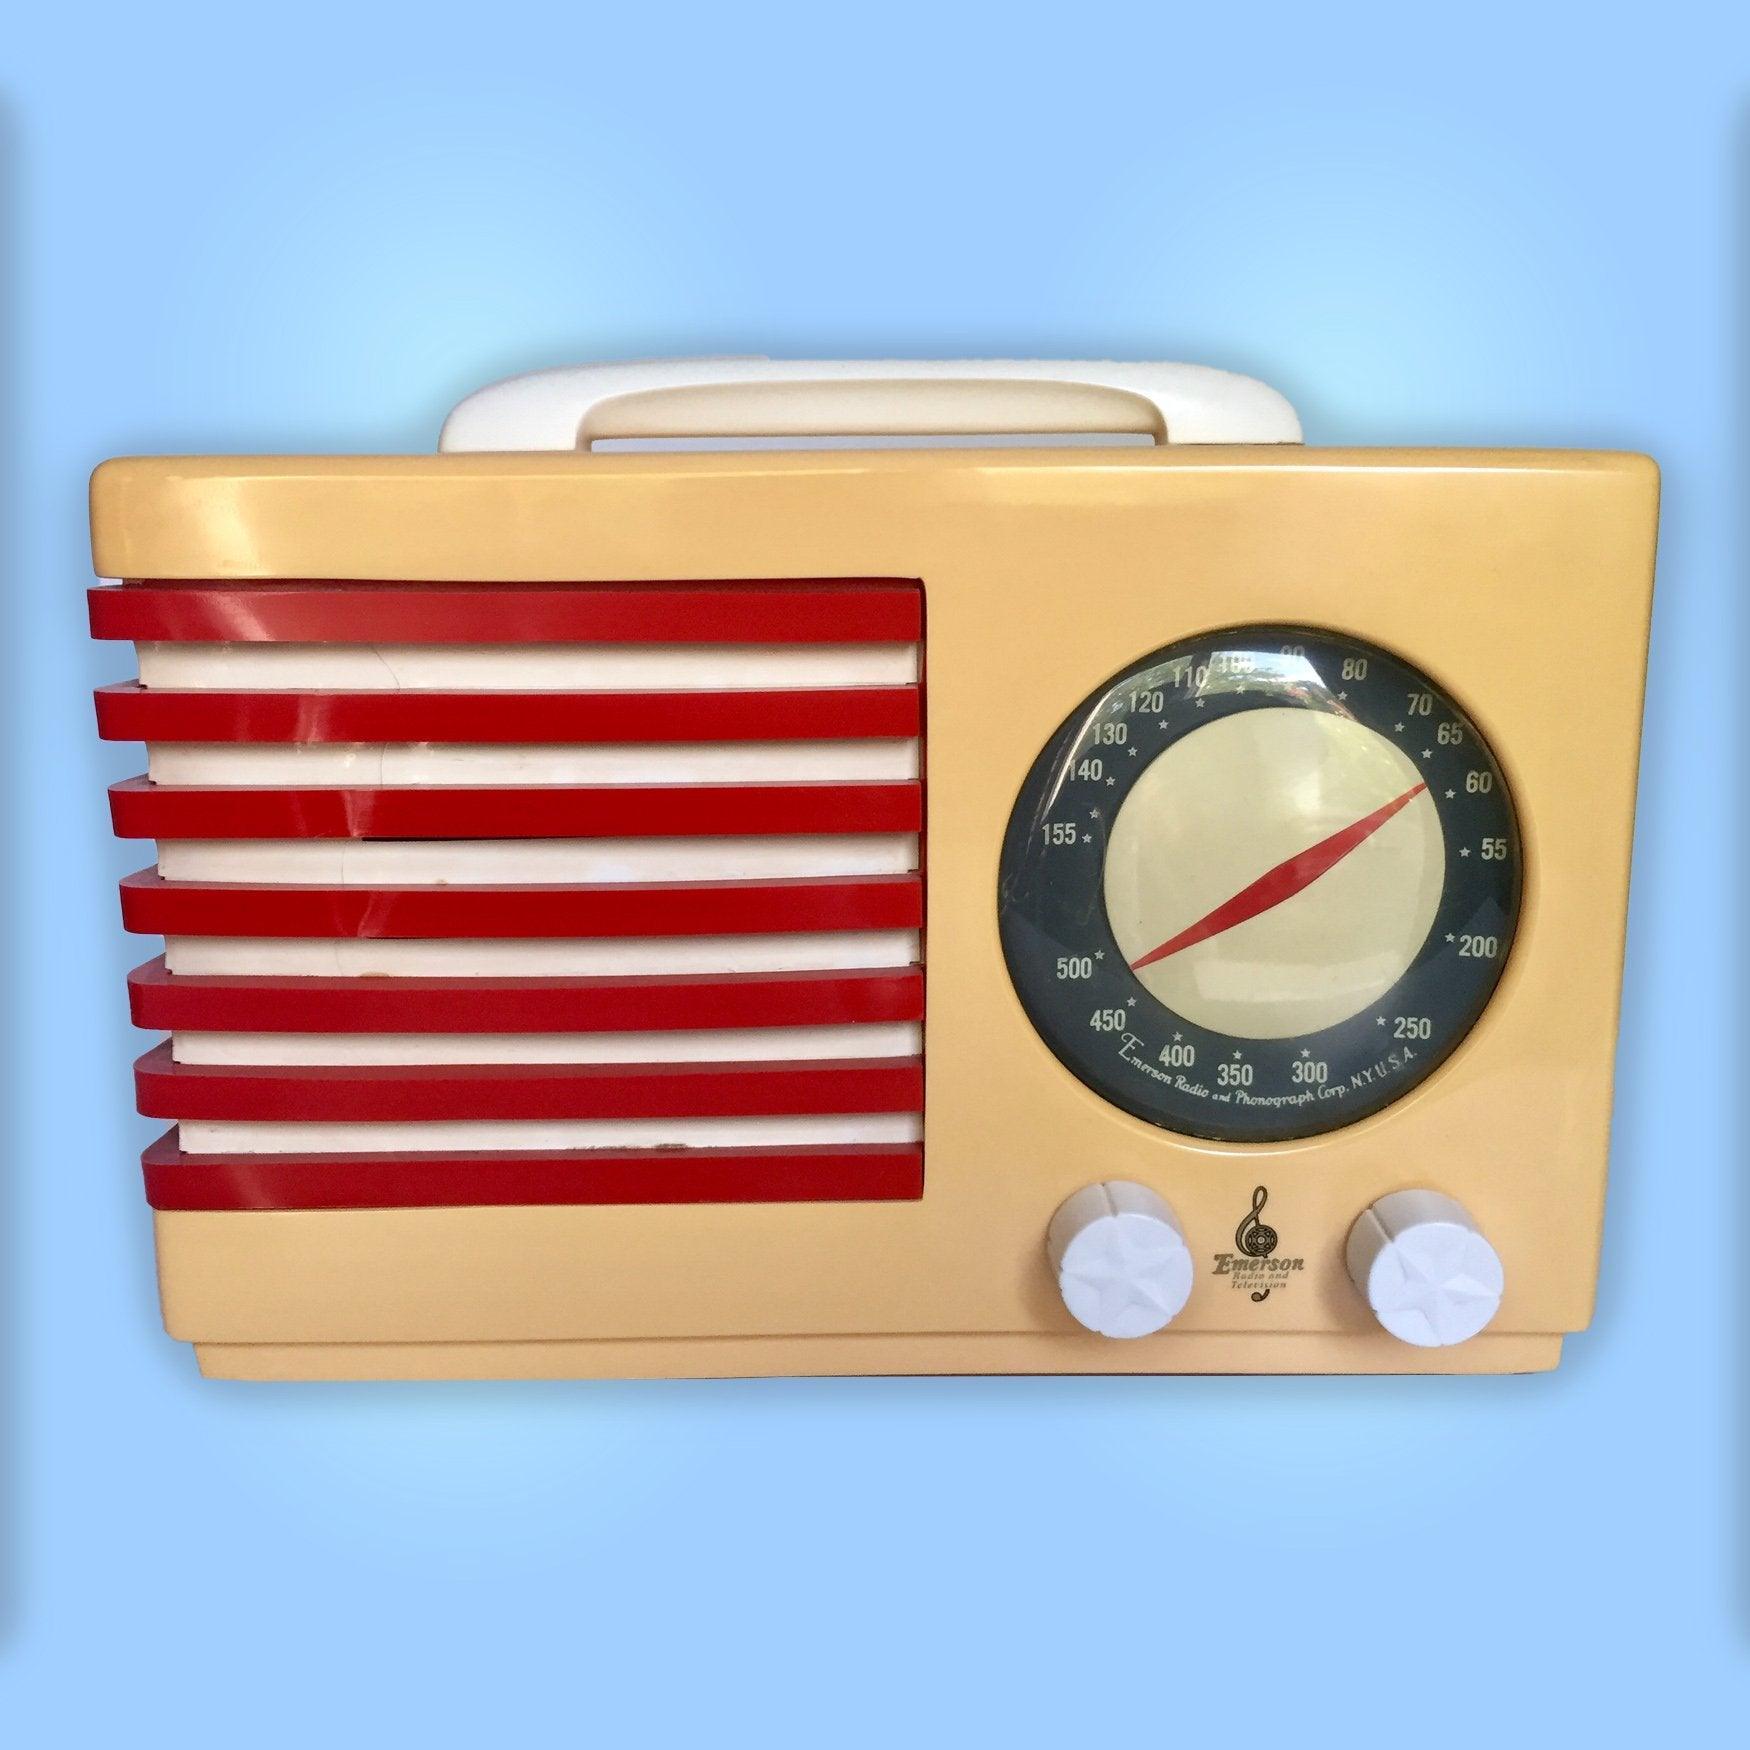 Emerson 400 "Patriot" Catalin Radio White, White and Red Grille